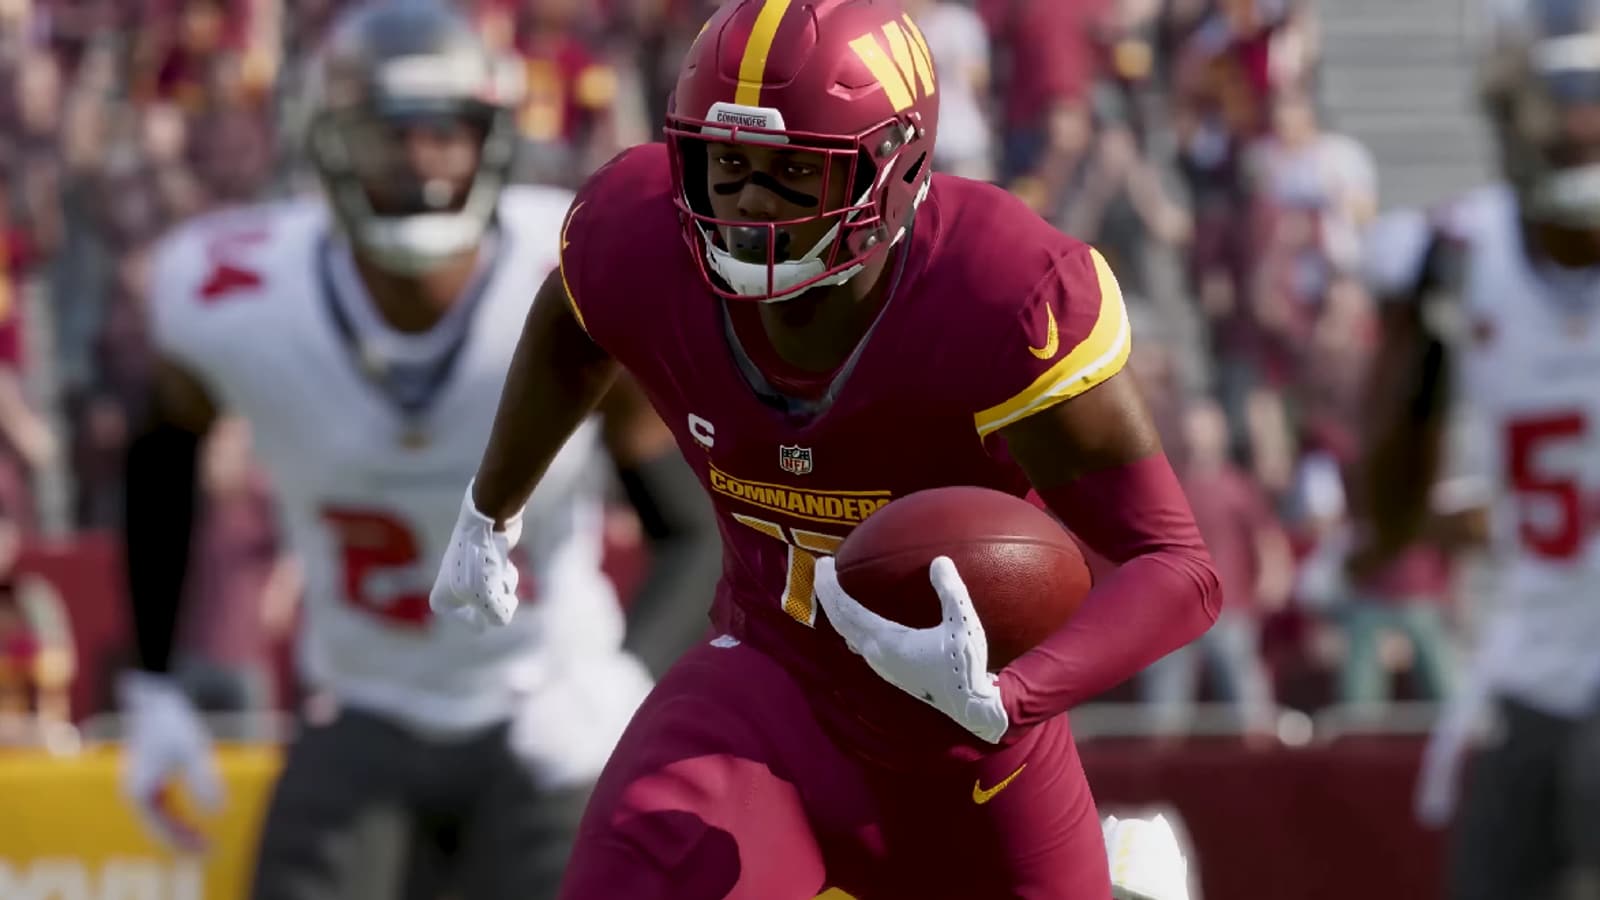 Madden NFL 23 Will Be Free For a Limited Time Soon